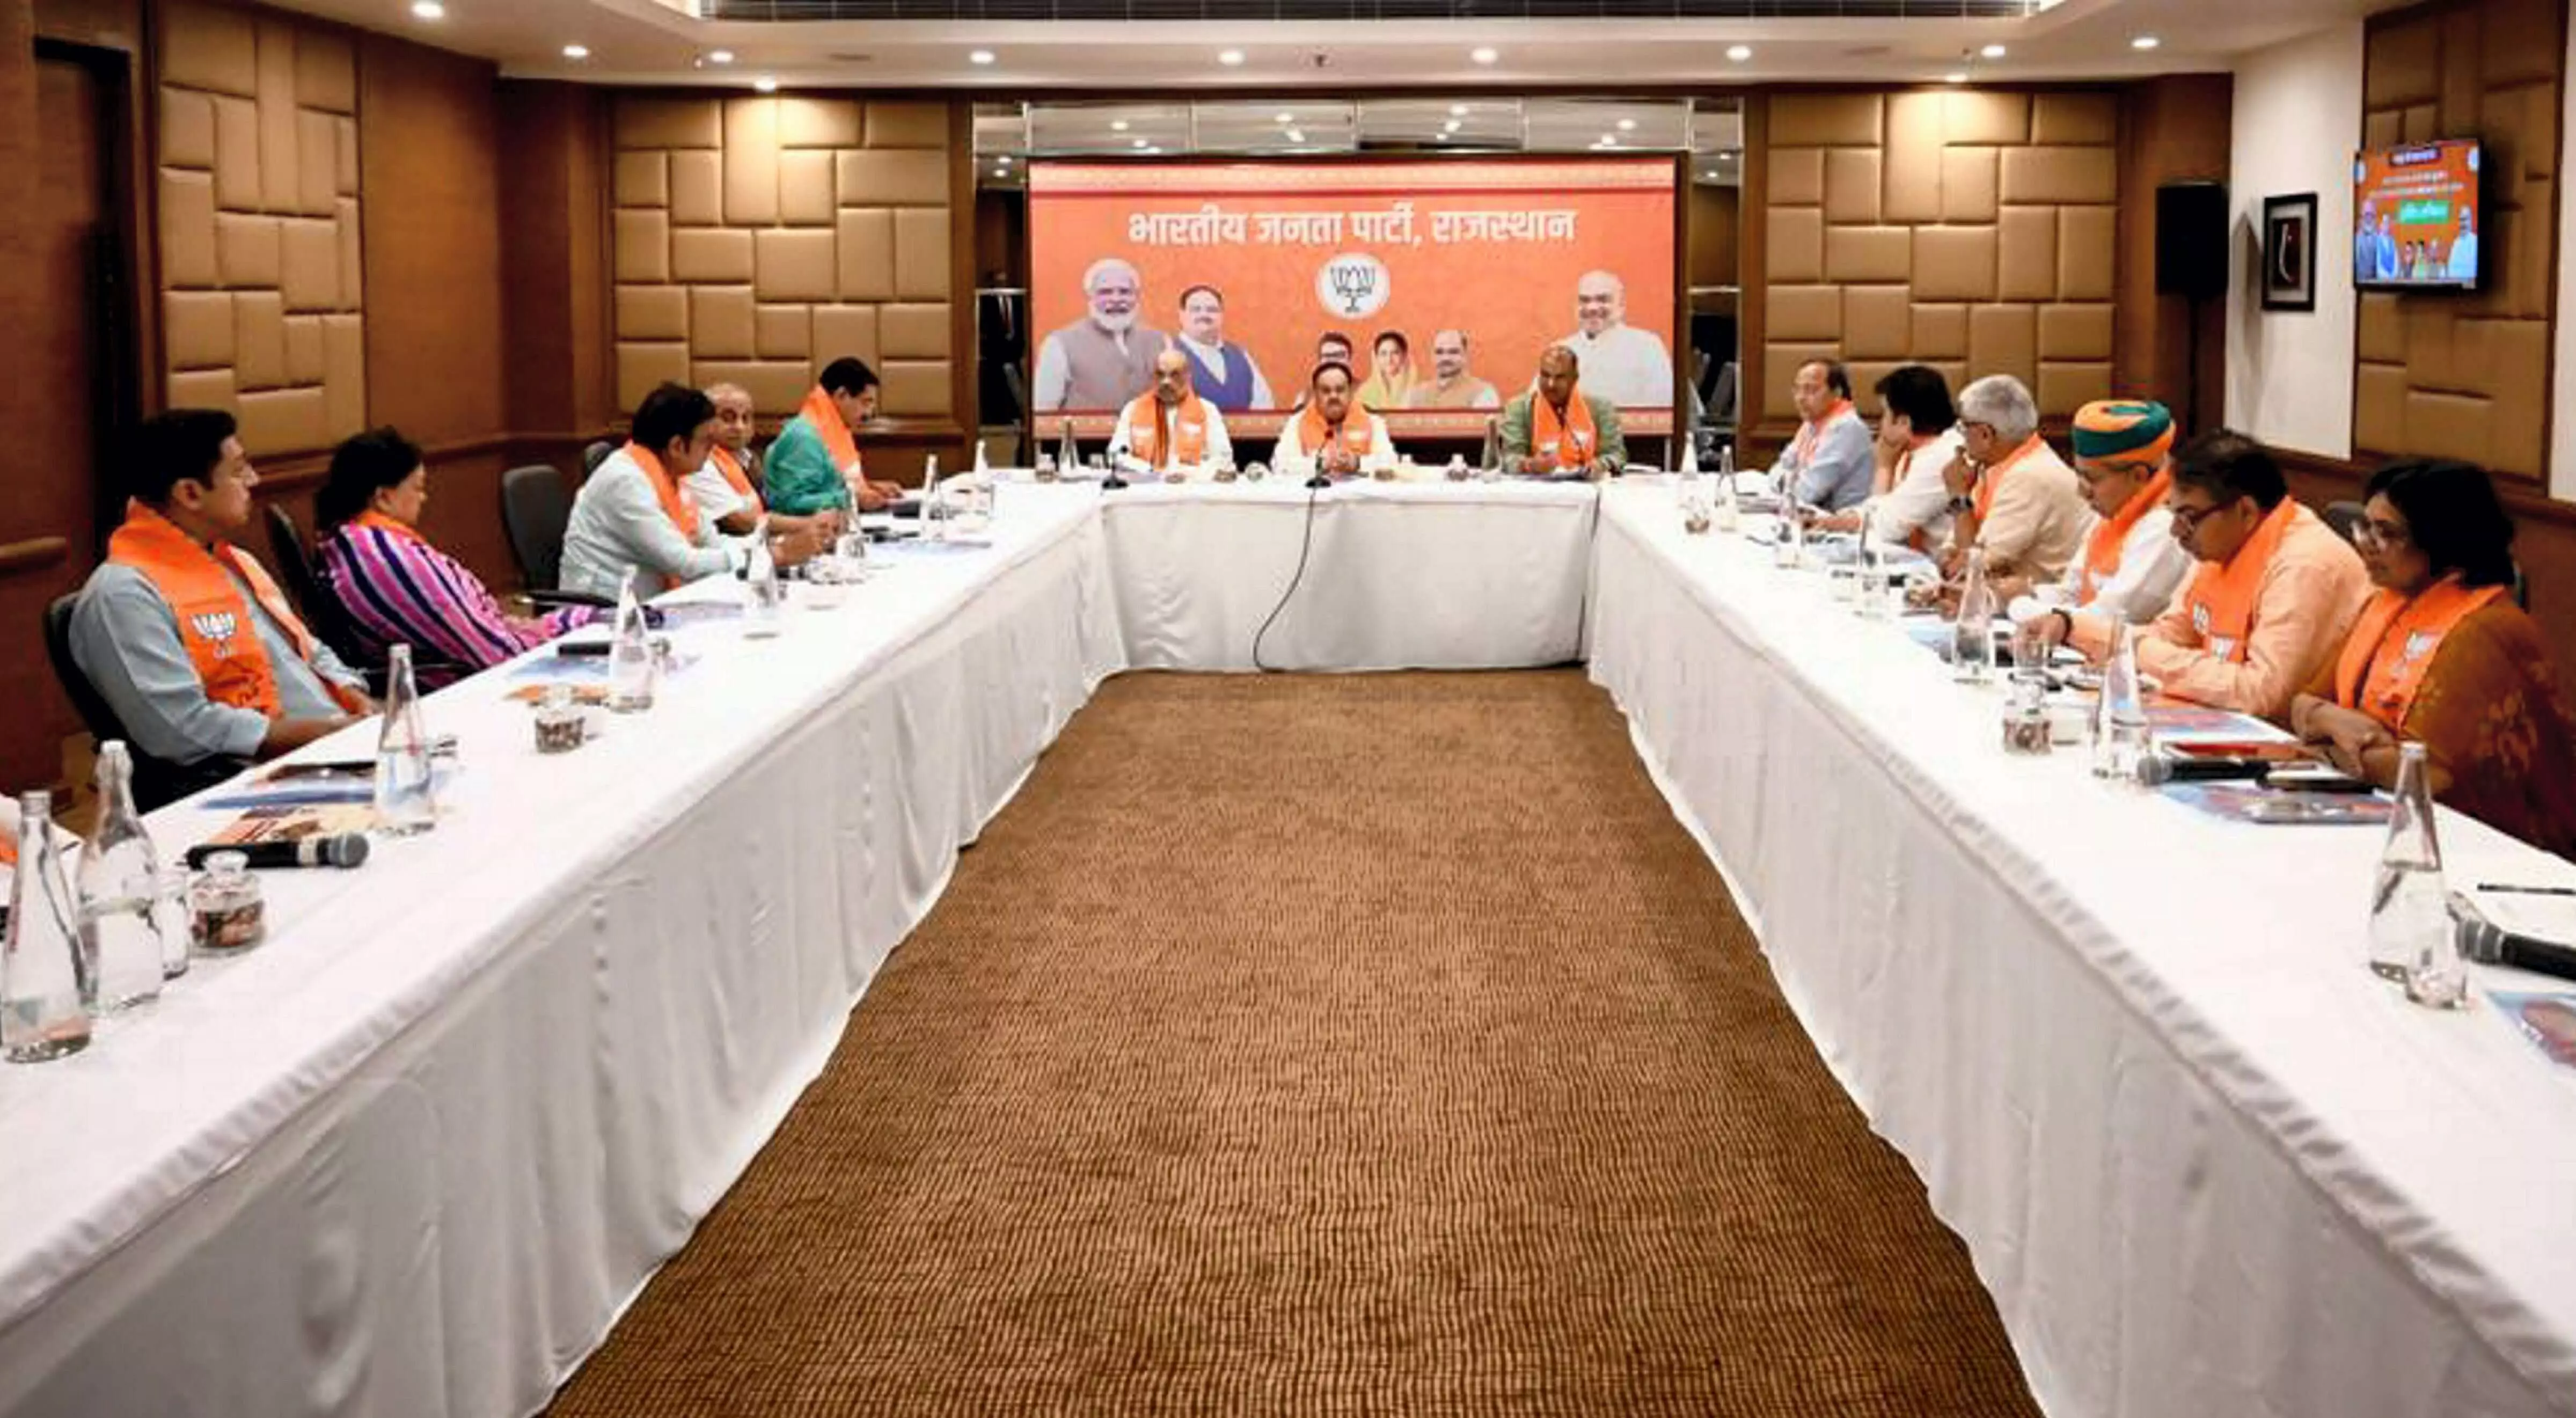 BJP top brass meets at Naddas residence to discuss plans for Rajasthan, Chhattisgarh polls